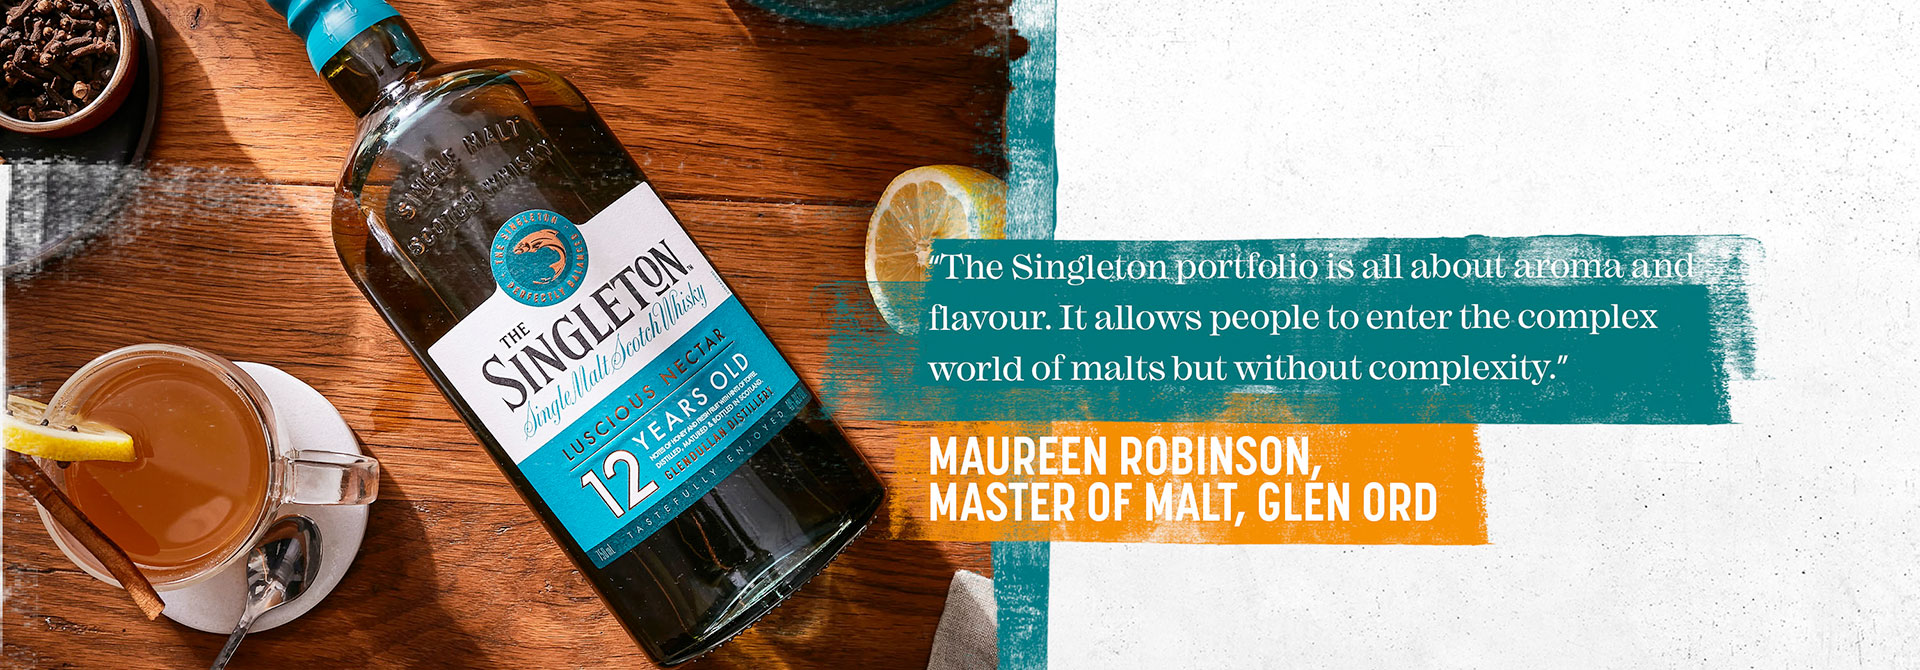 The Singleton - All about aroma and flavour